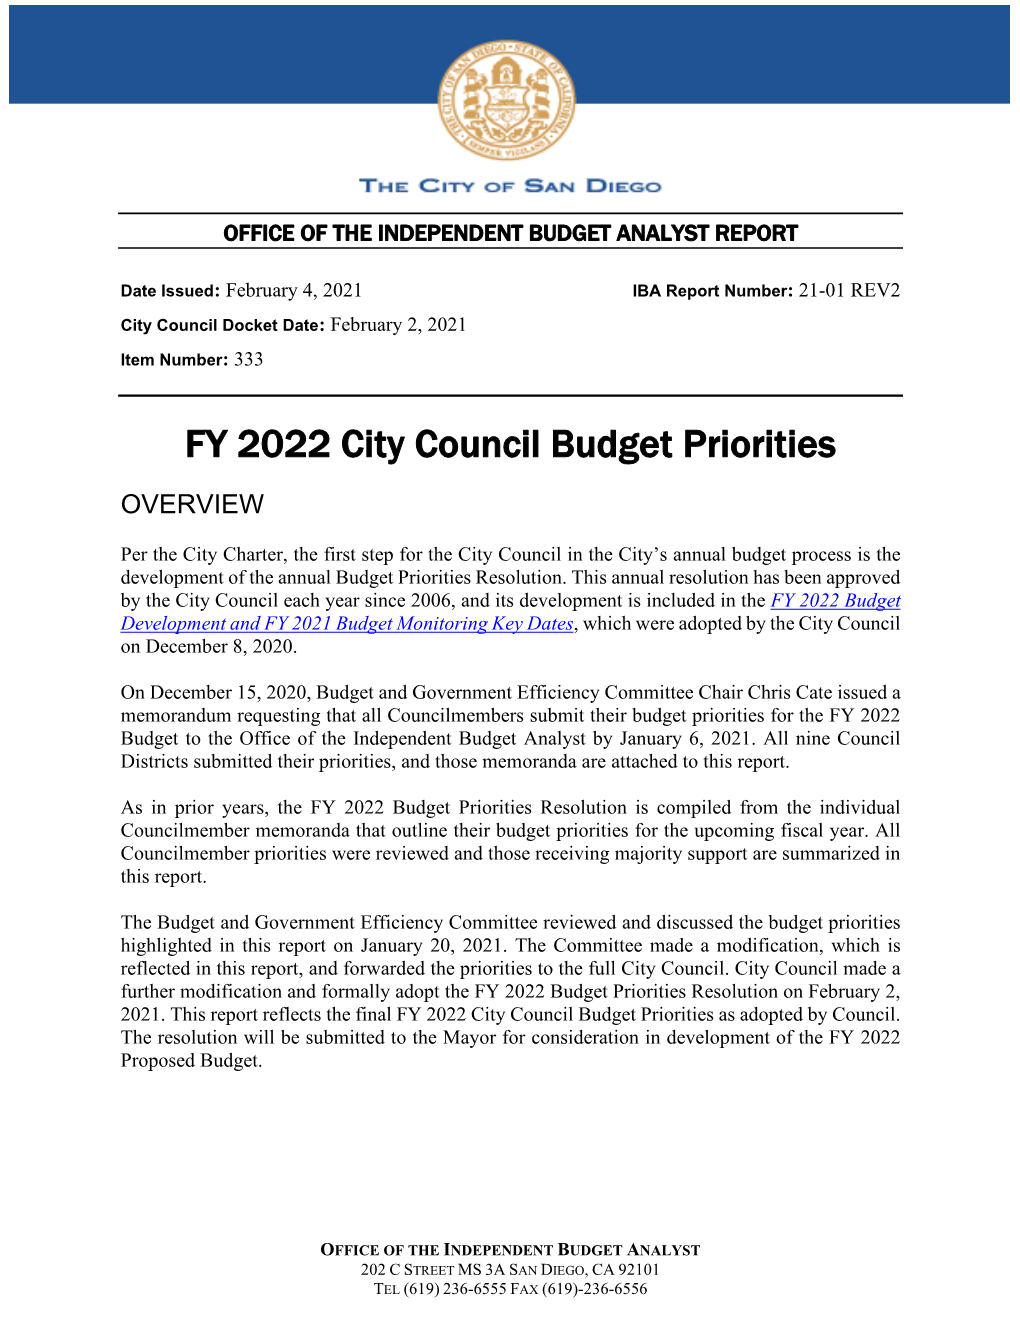 FY 2022 City Council Budget Priorities